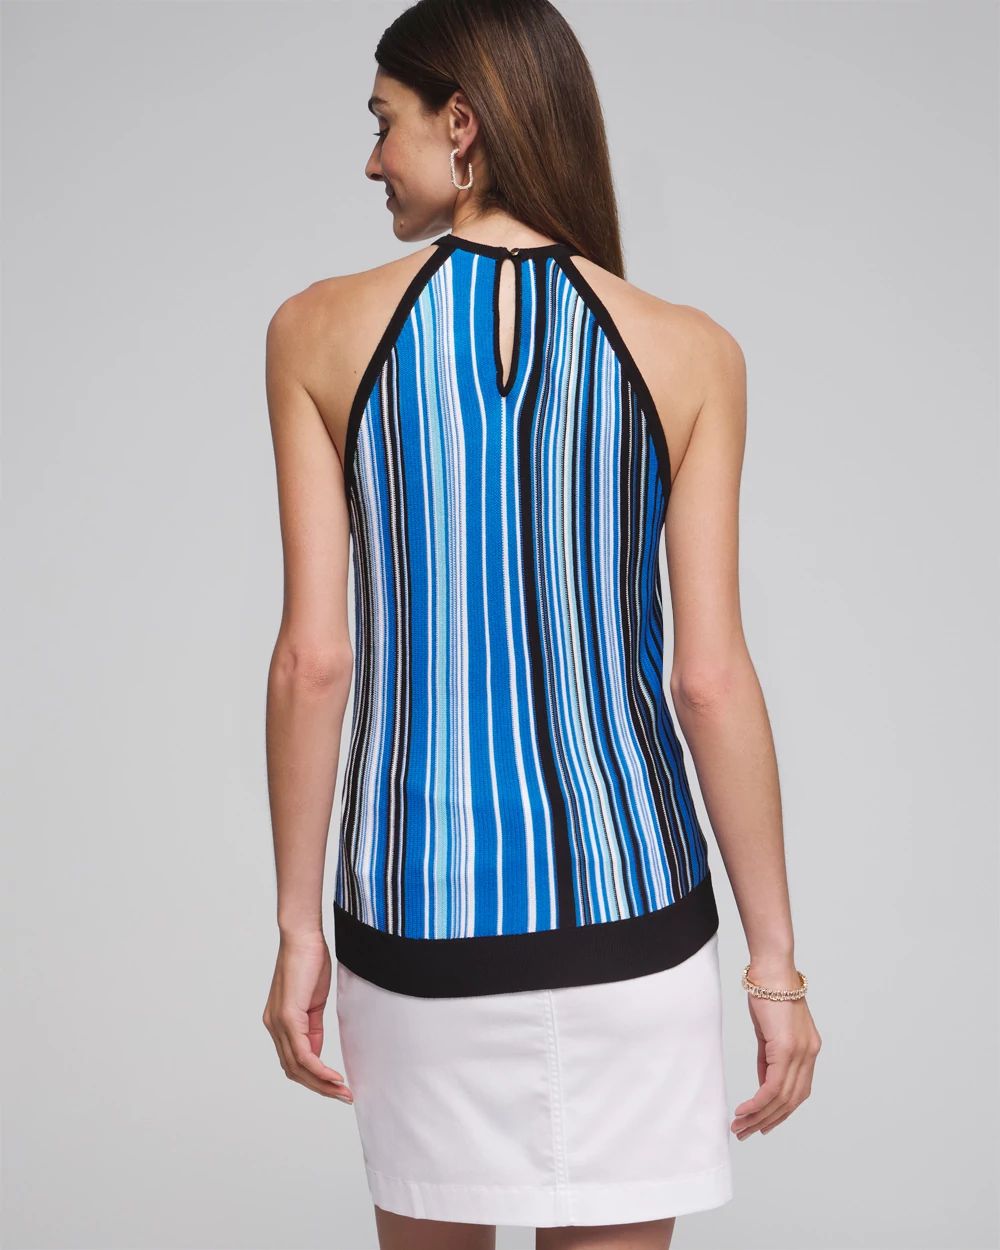 Outlet WHBM Sleeveless Striped Halter Top click to view larger image.